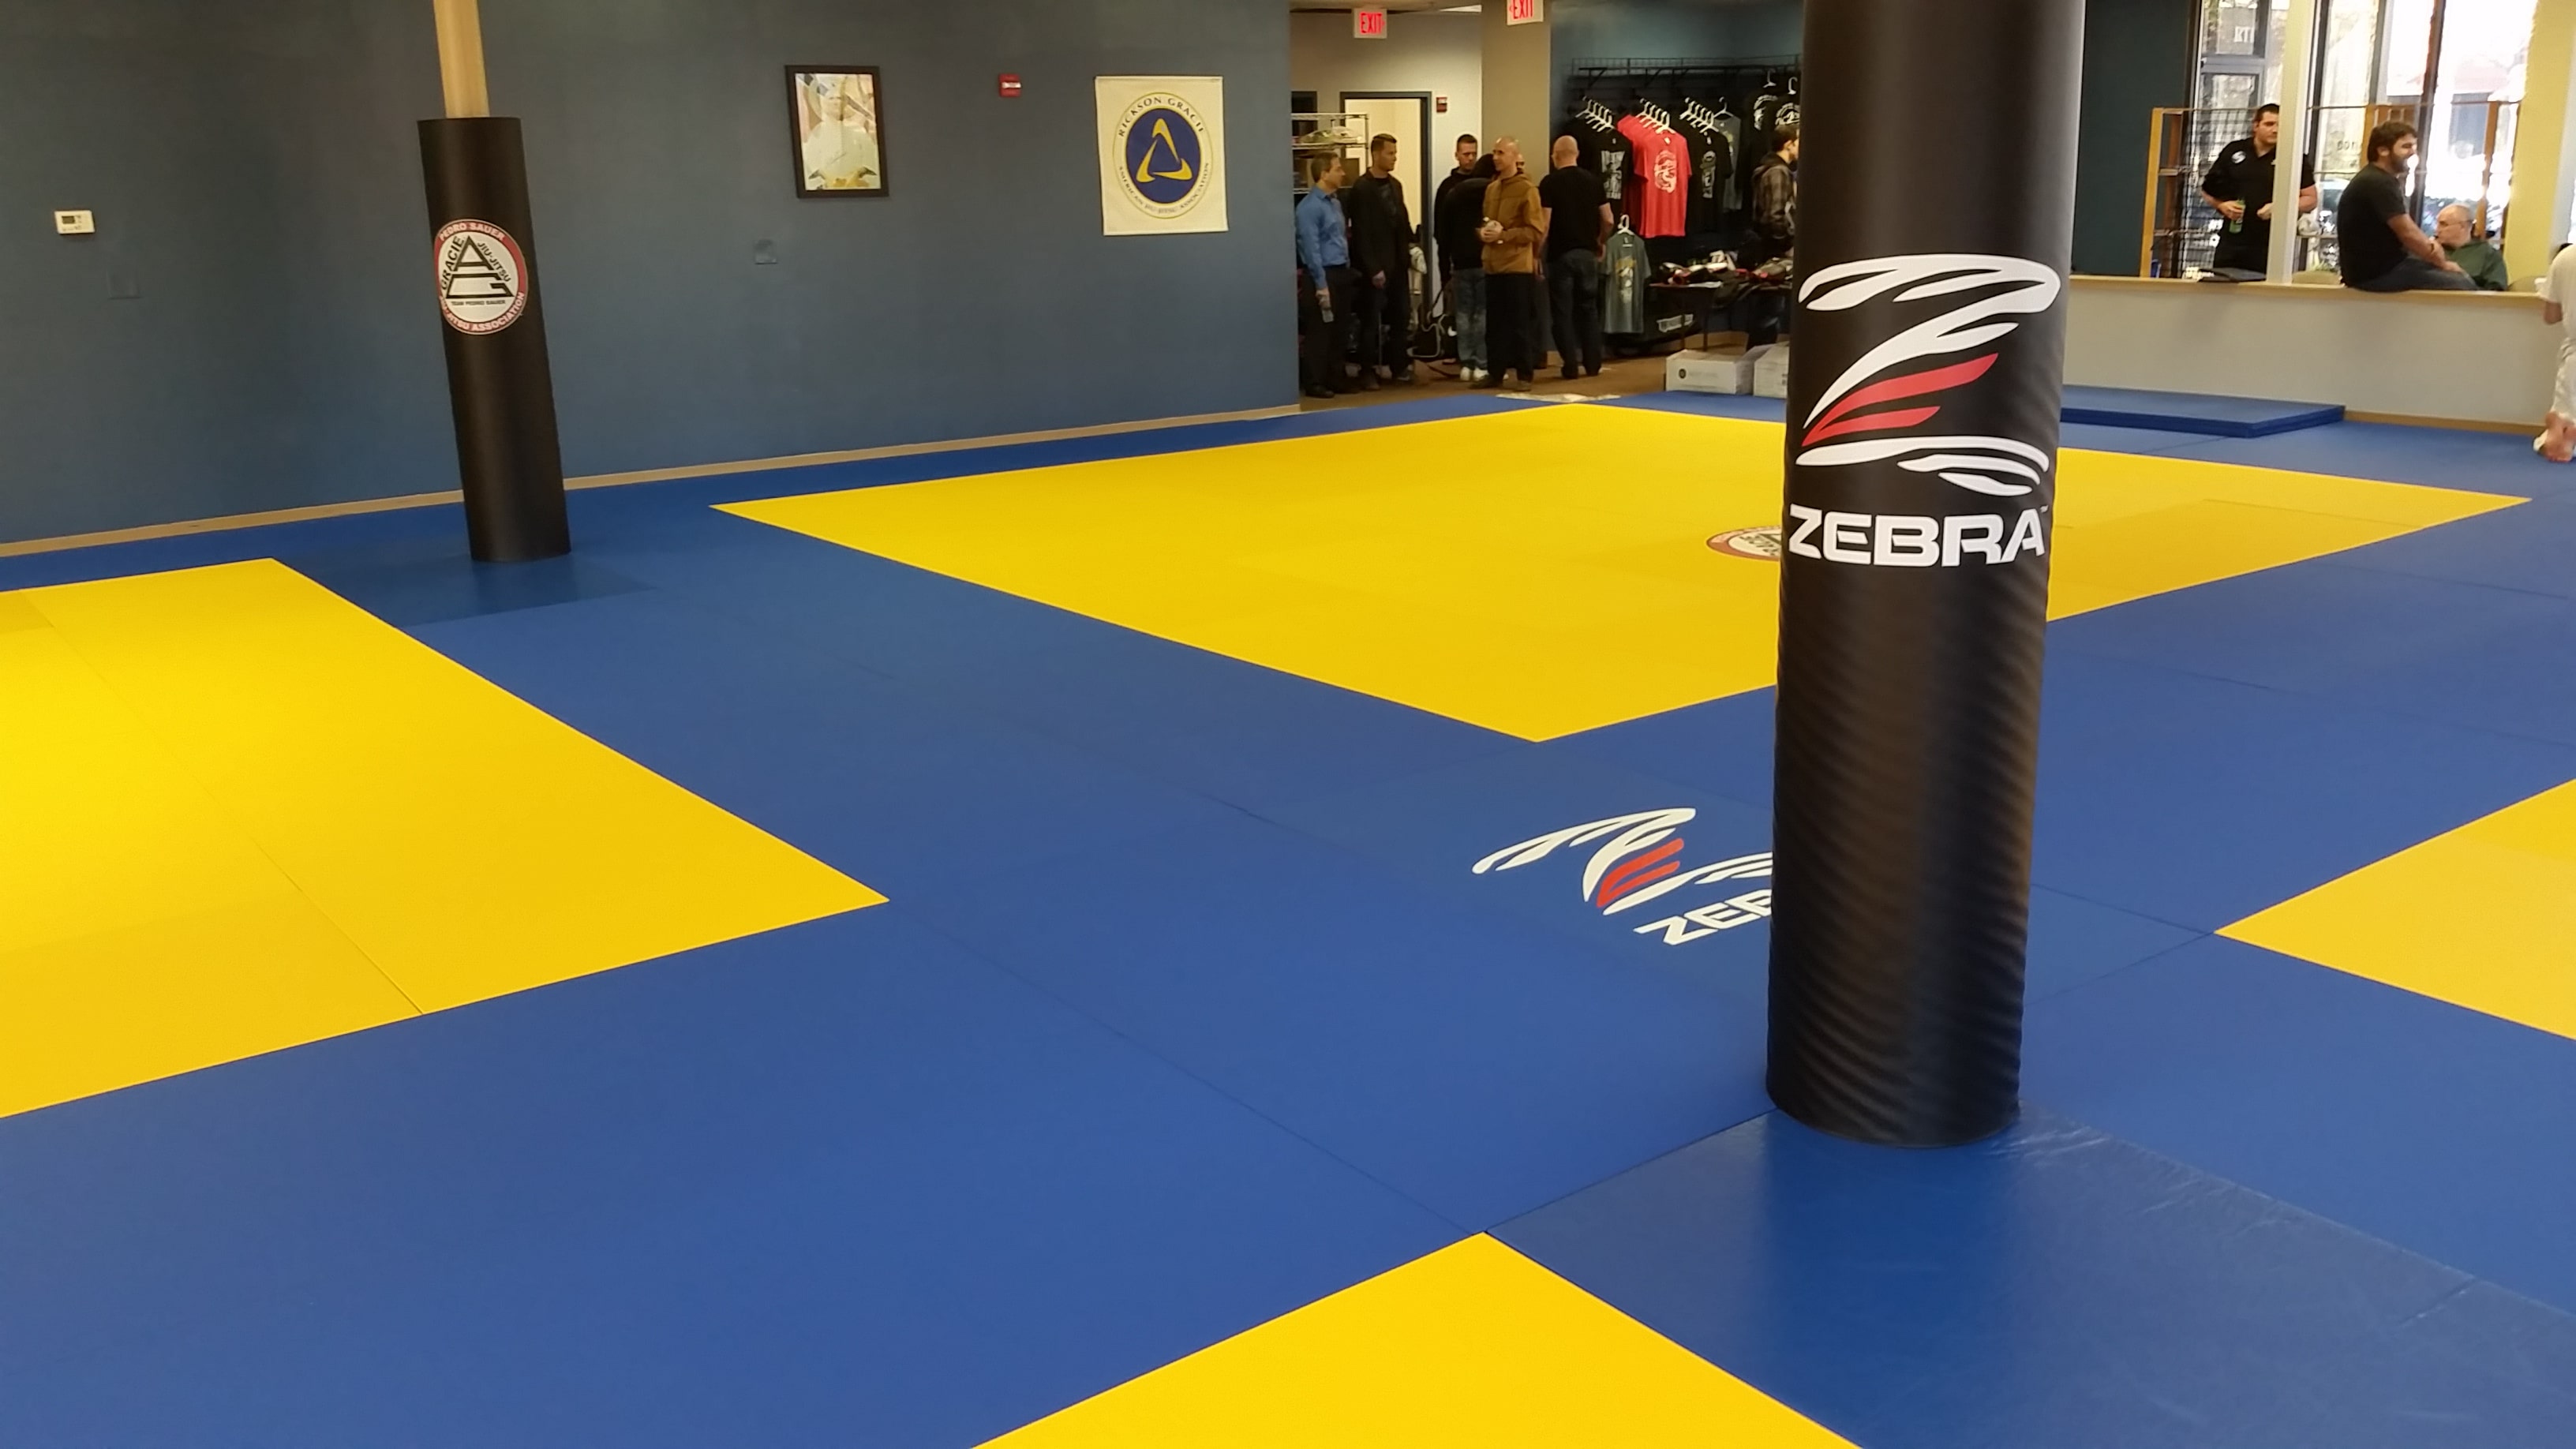 zebra pole pads in gym with zebra mats in a ring configuration